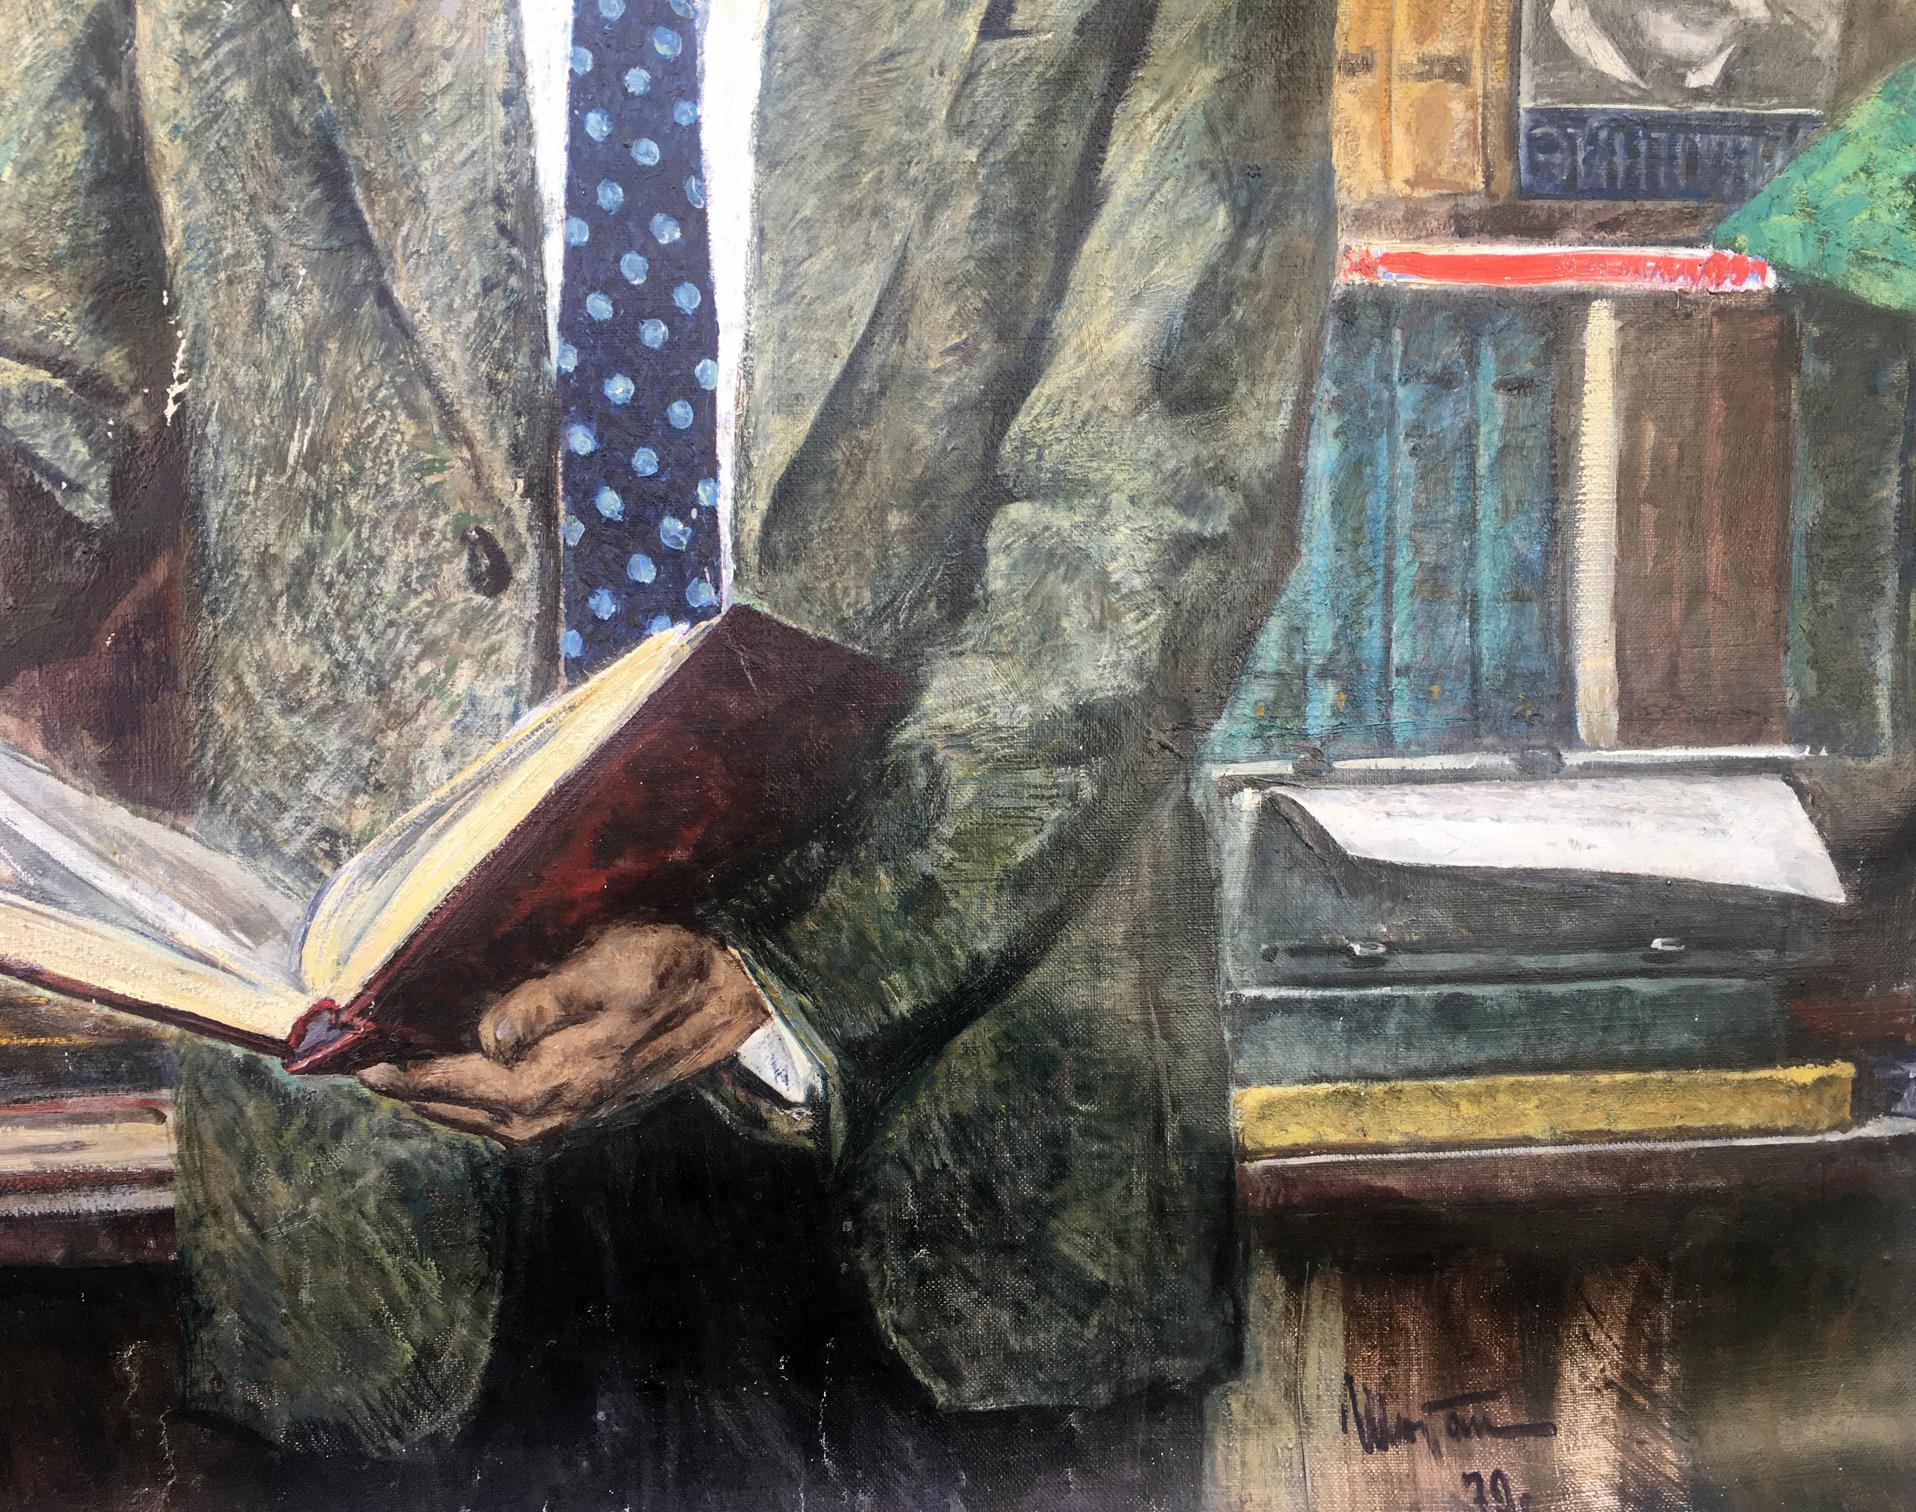 The oil painting by Shostak David Zelmanovich portrays the renowned writer Nathan Rybak